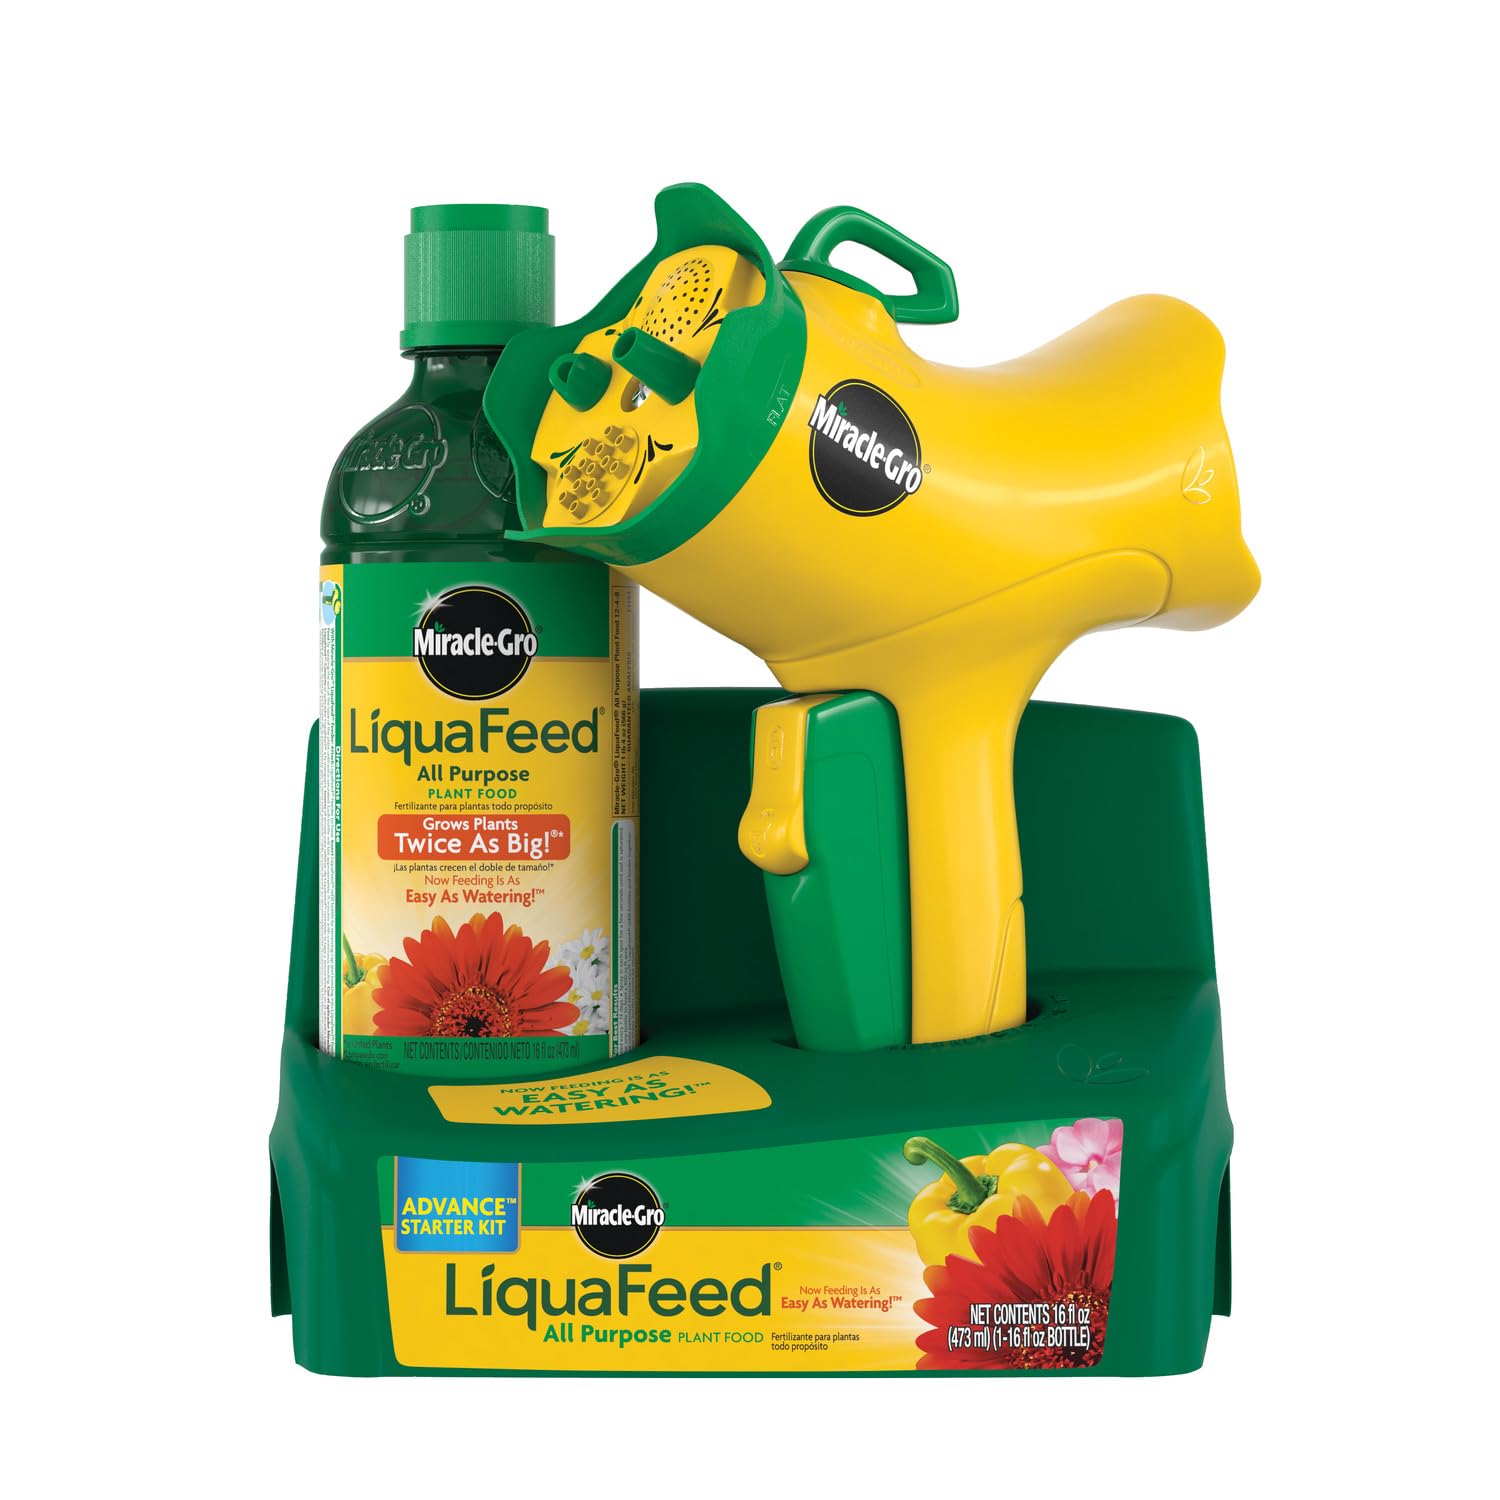 Miracle-Gro LiquaFeed All Purpose Plant Food Advance Starter Kit, One Bottle of Plant Fertilizer and One Feeder, List Price is $19.49, Now Only $8.74, You Save $10.75